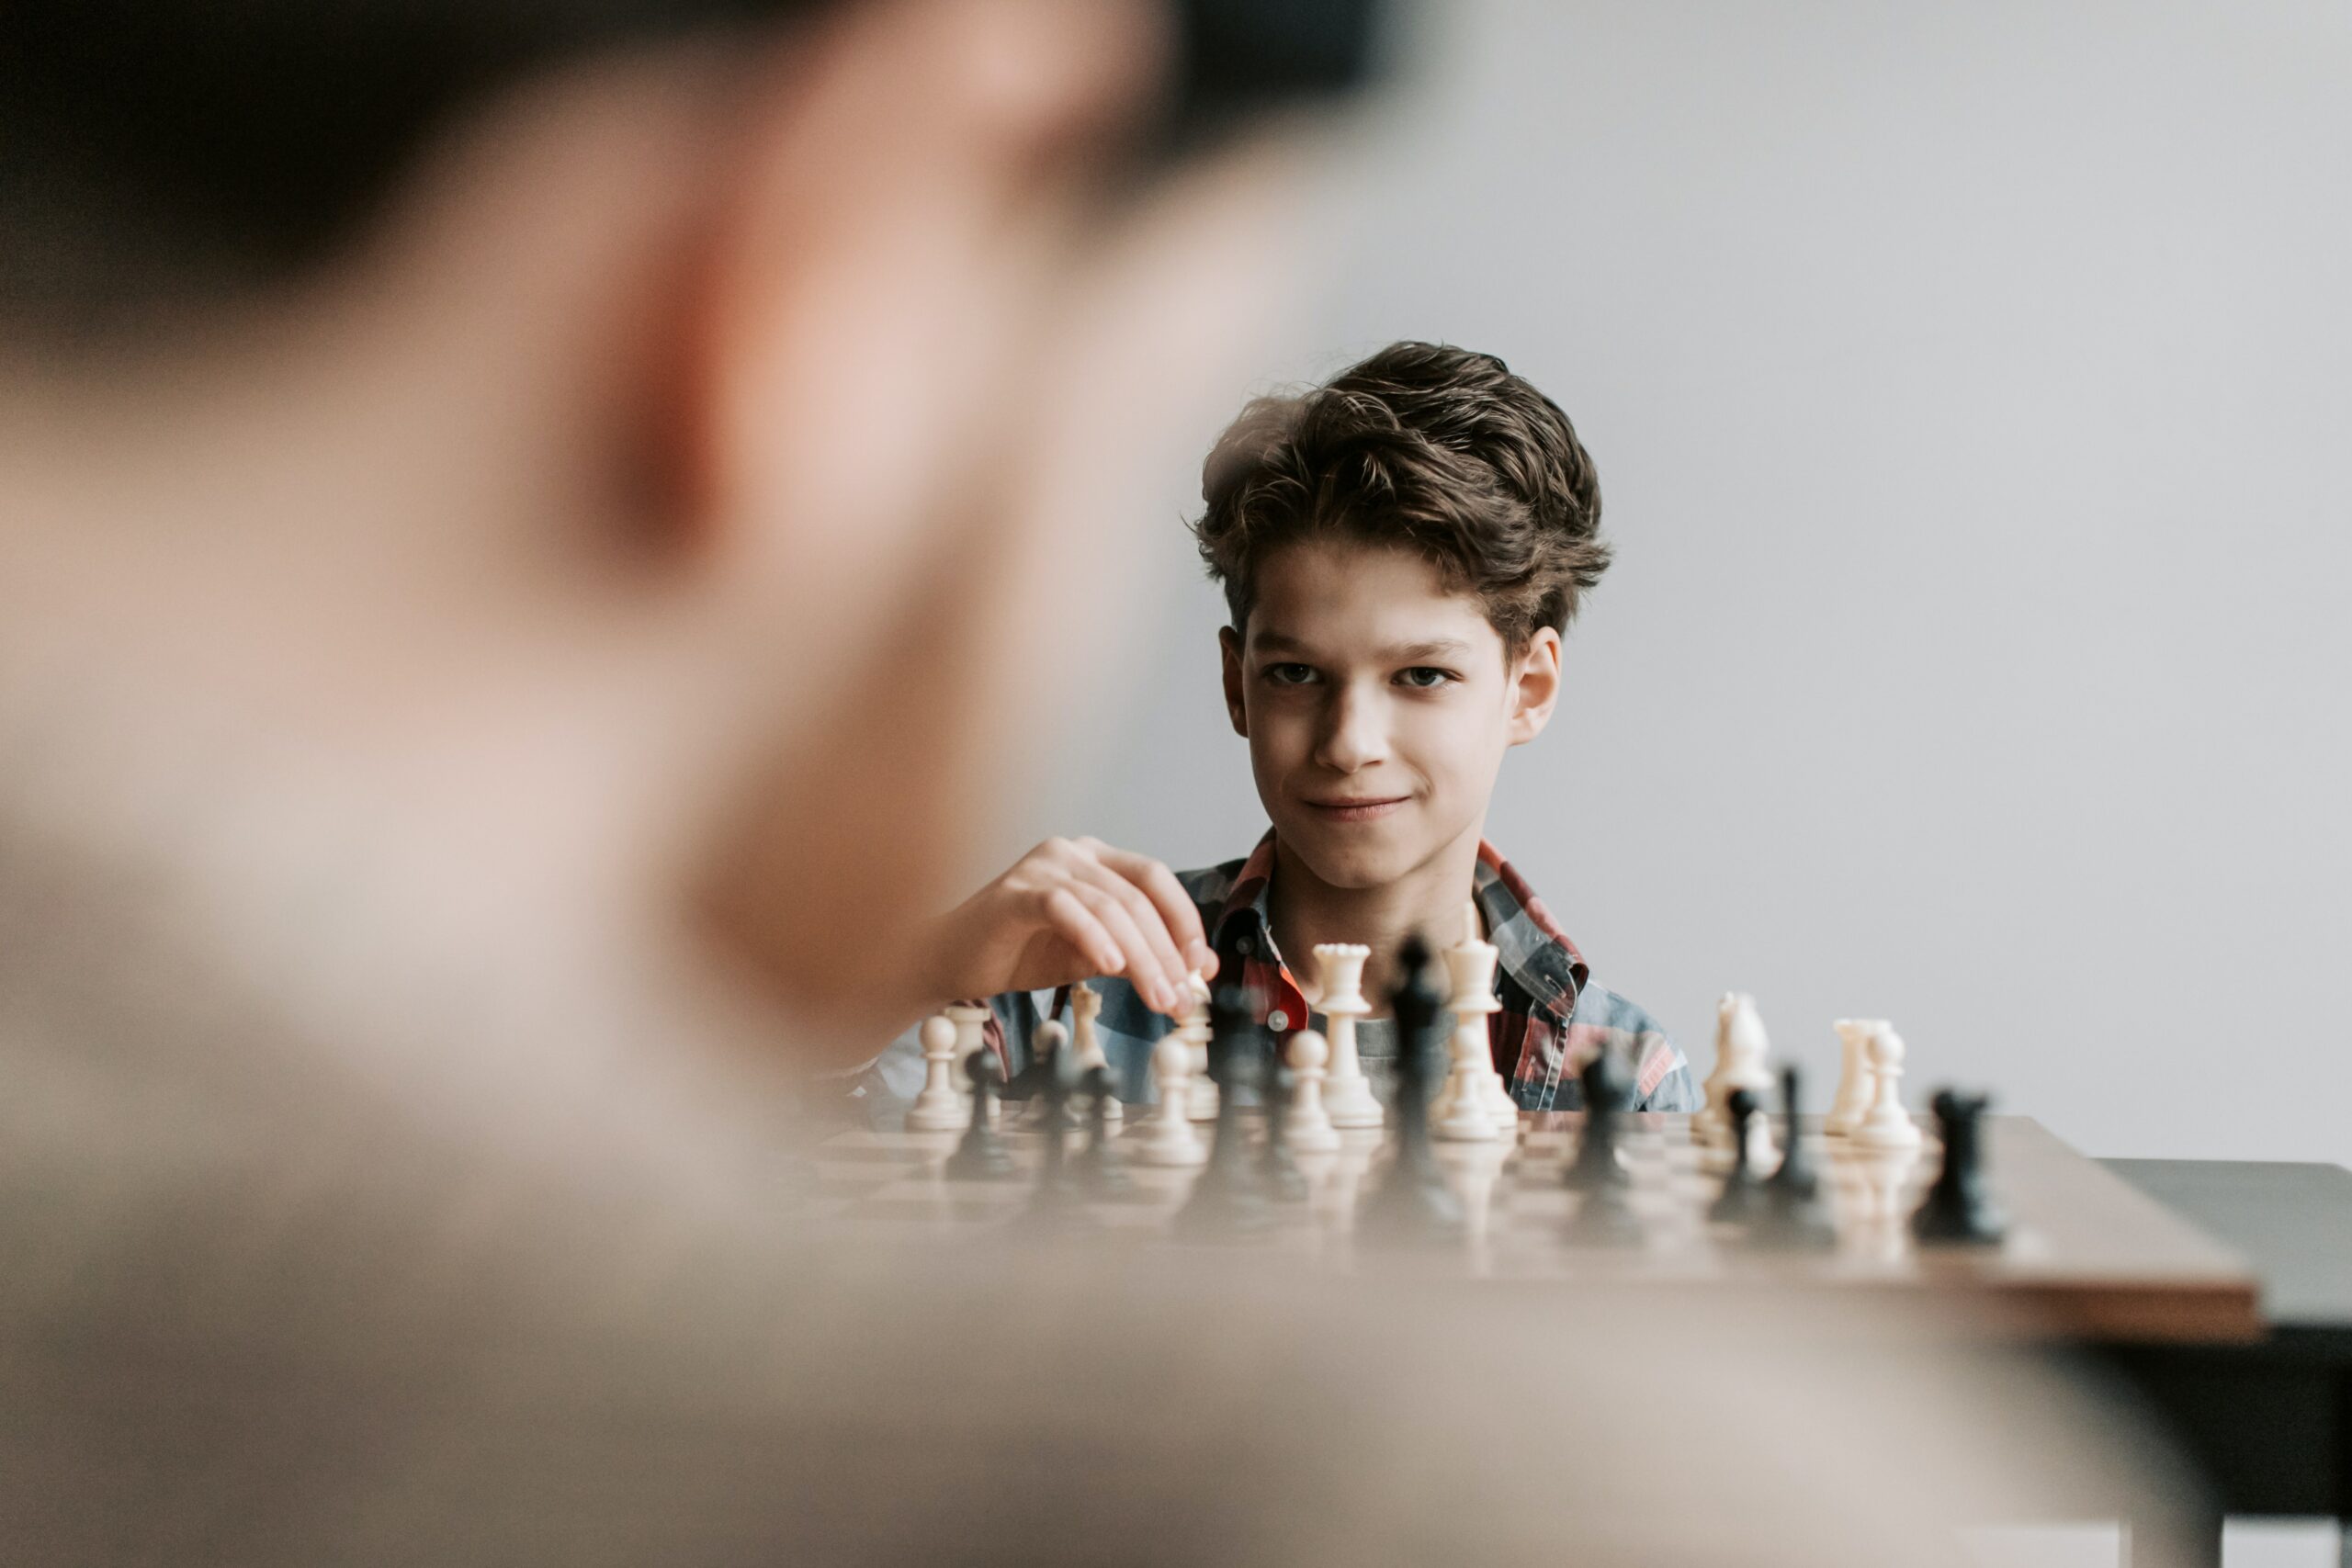 Two players engaged in chess